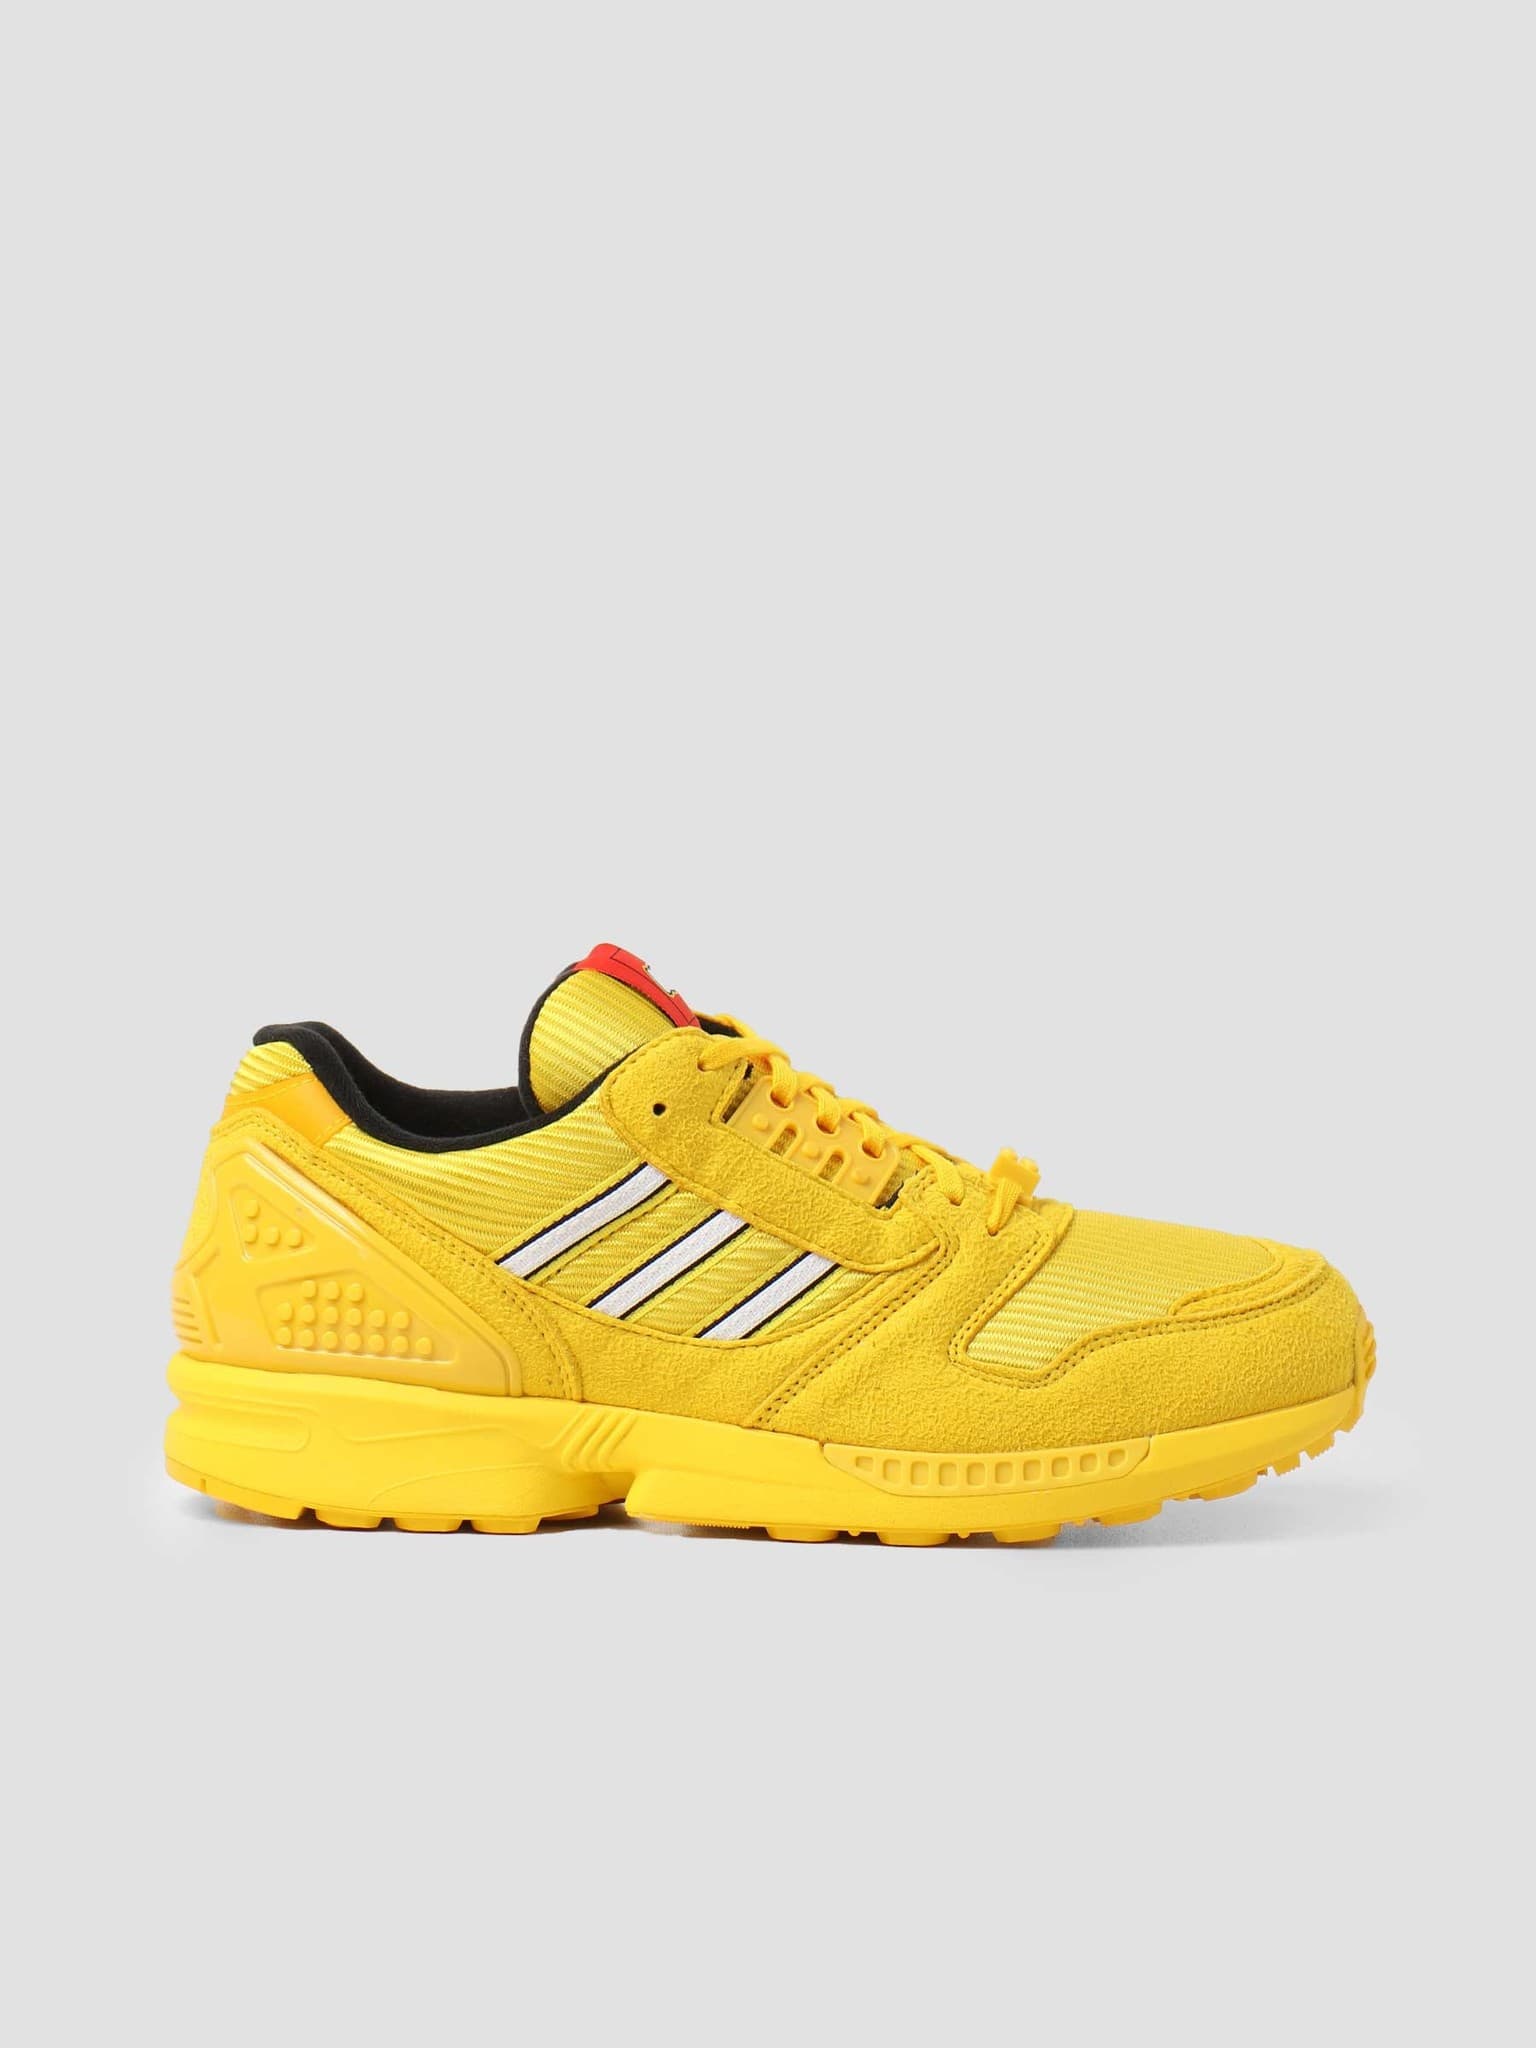 ZX 8000 Lego Eqt Yellow Footwear White Eqt Yellow FY7081